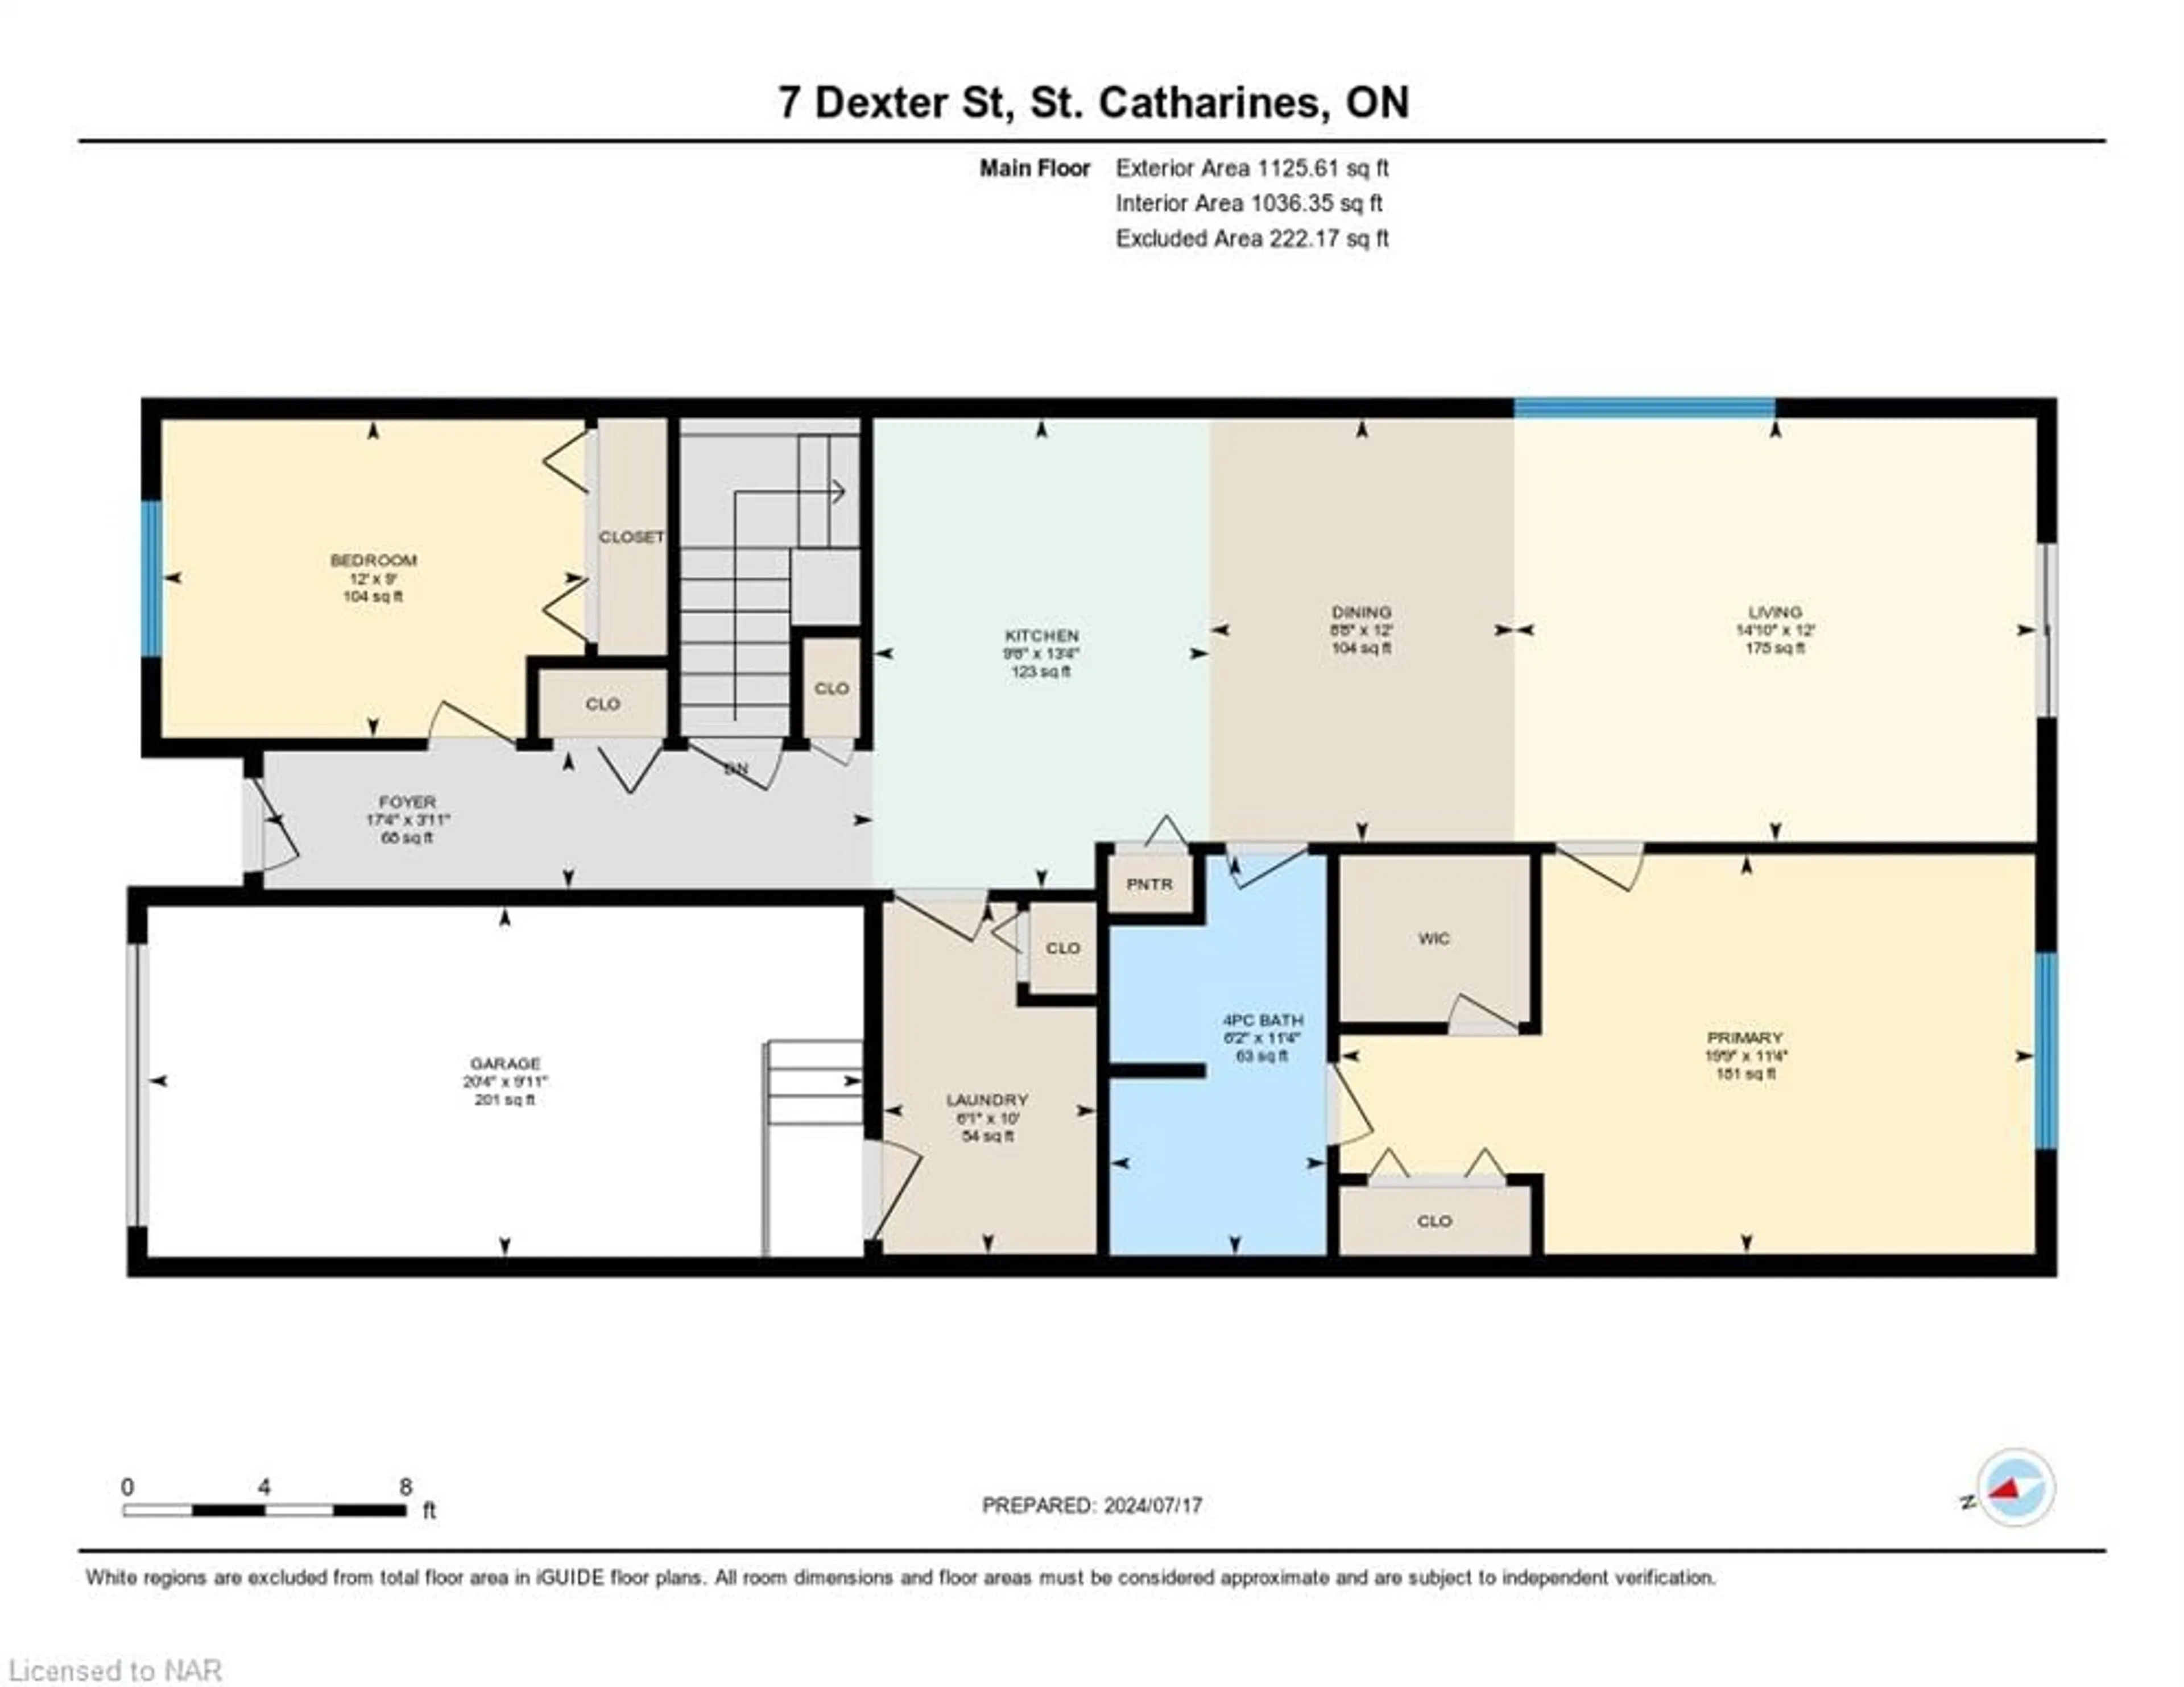 Floor plan for 7 Dexter St, St. Catharines Ontario L2S 2L5